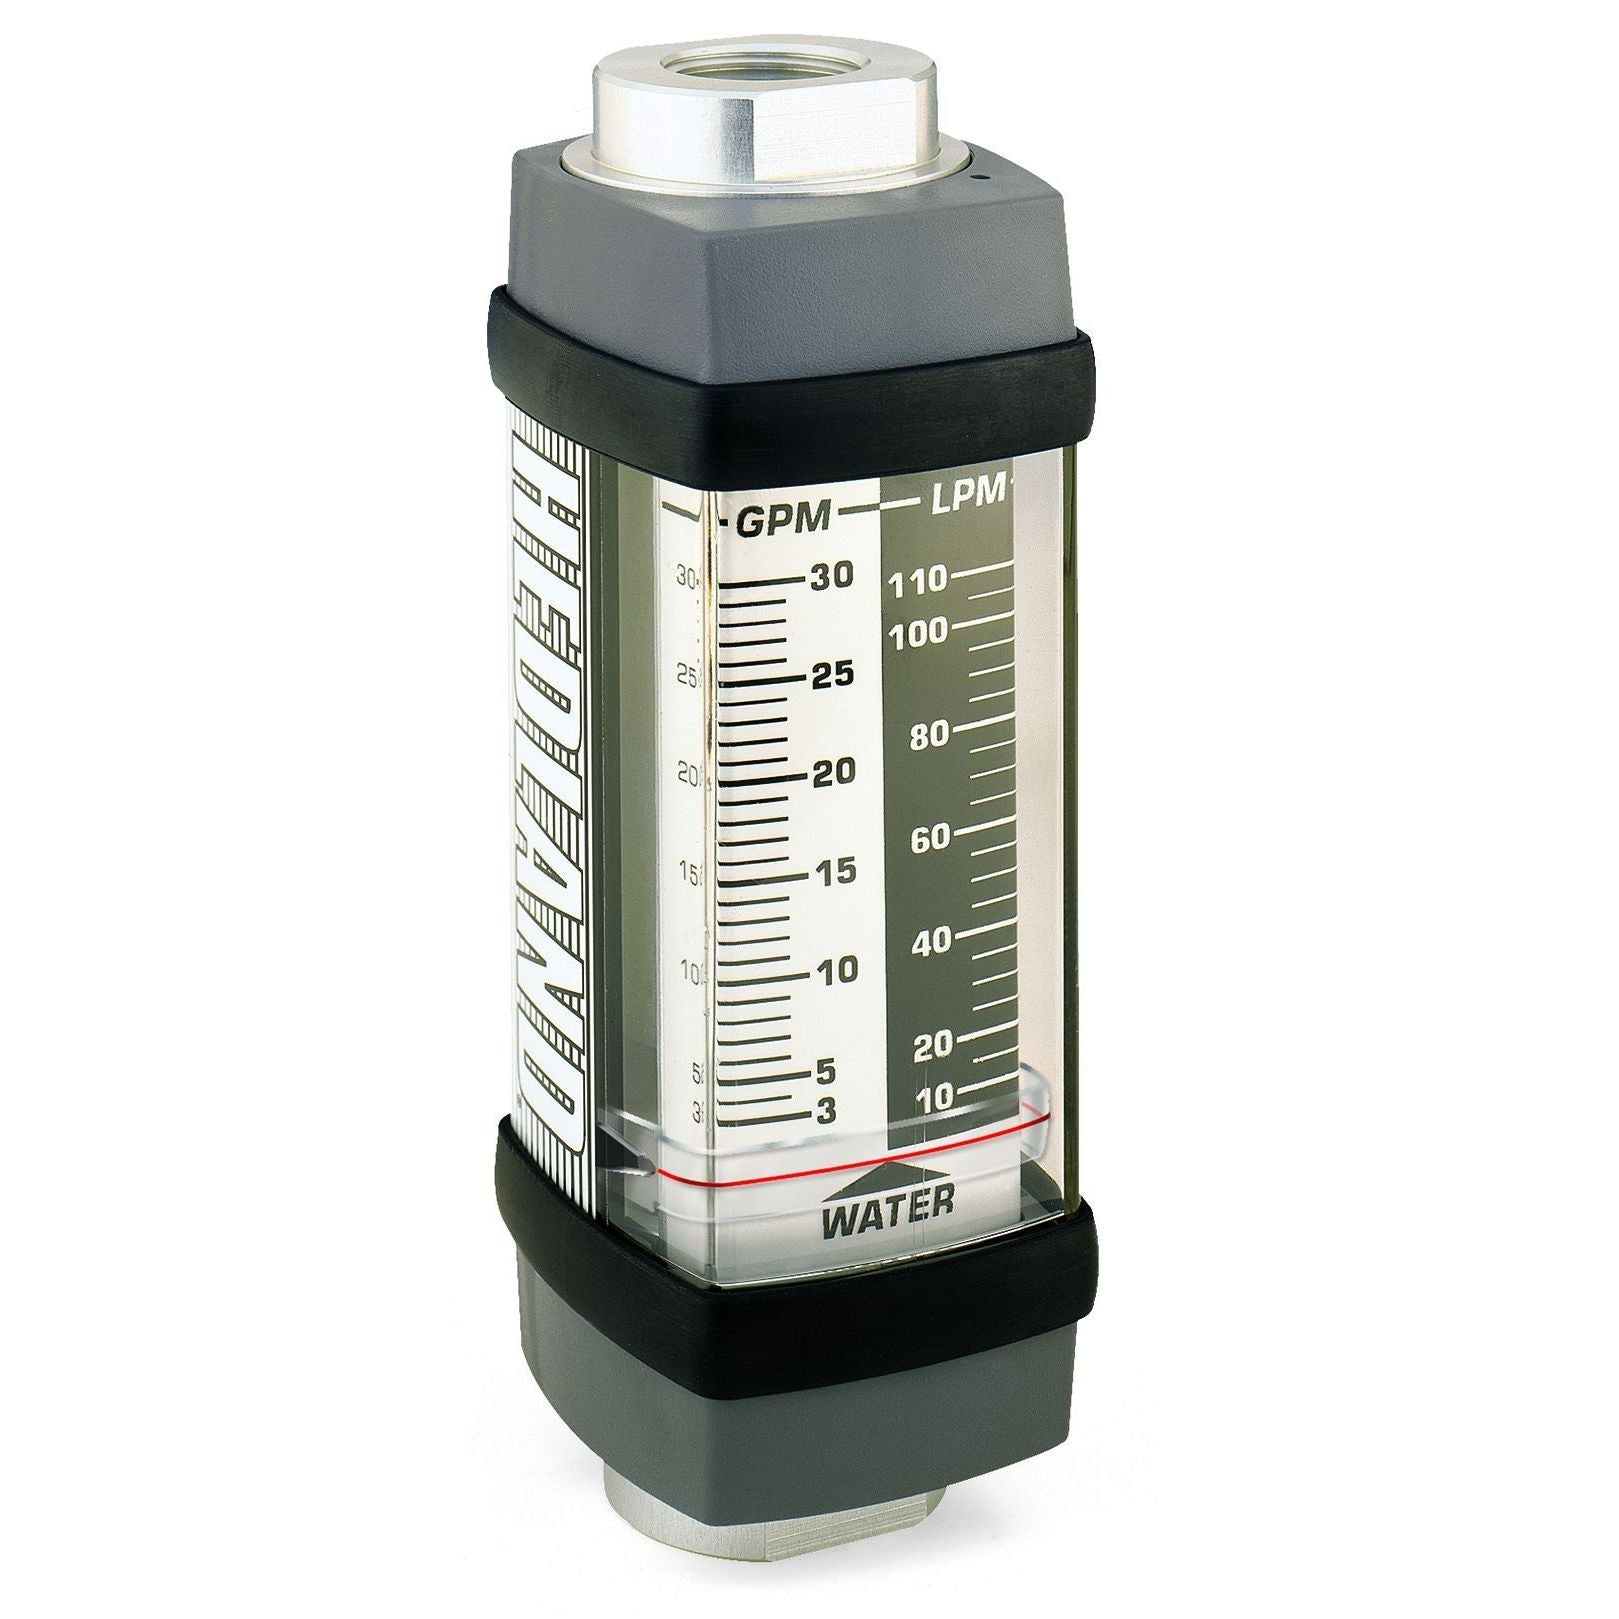 H841X-030 : Hedland 5000psi 316SS Flow Meter for Caustic or Corrosive Liquids, 1 NPT, 3 to 30 GPM